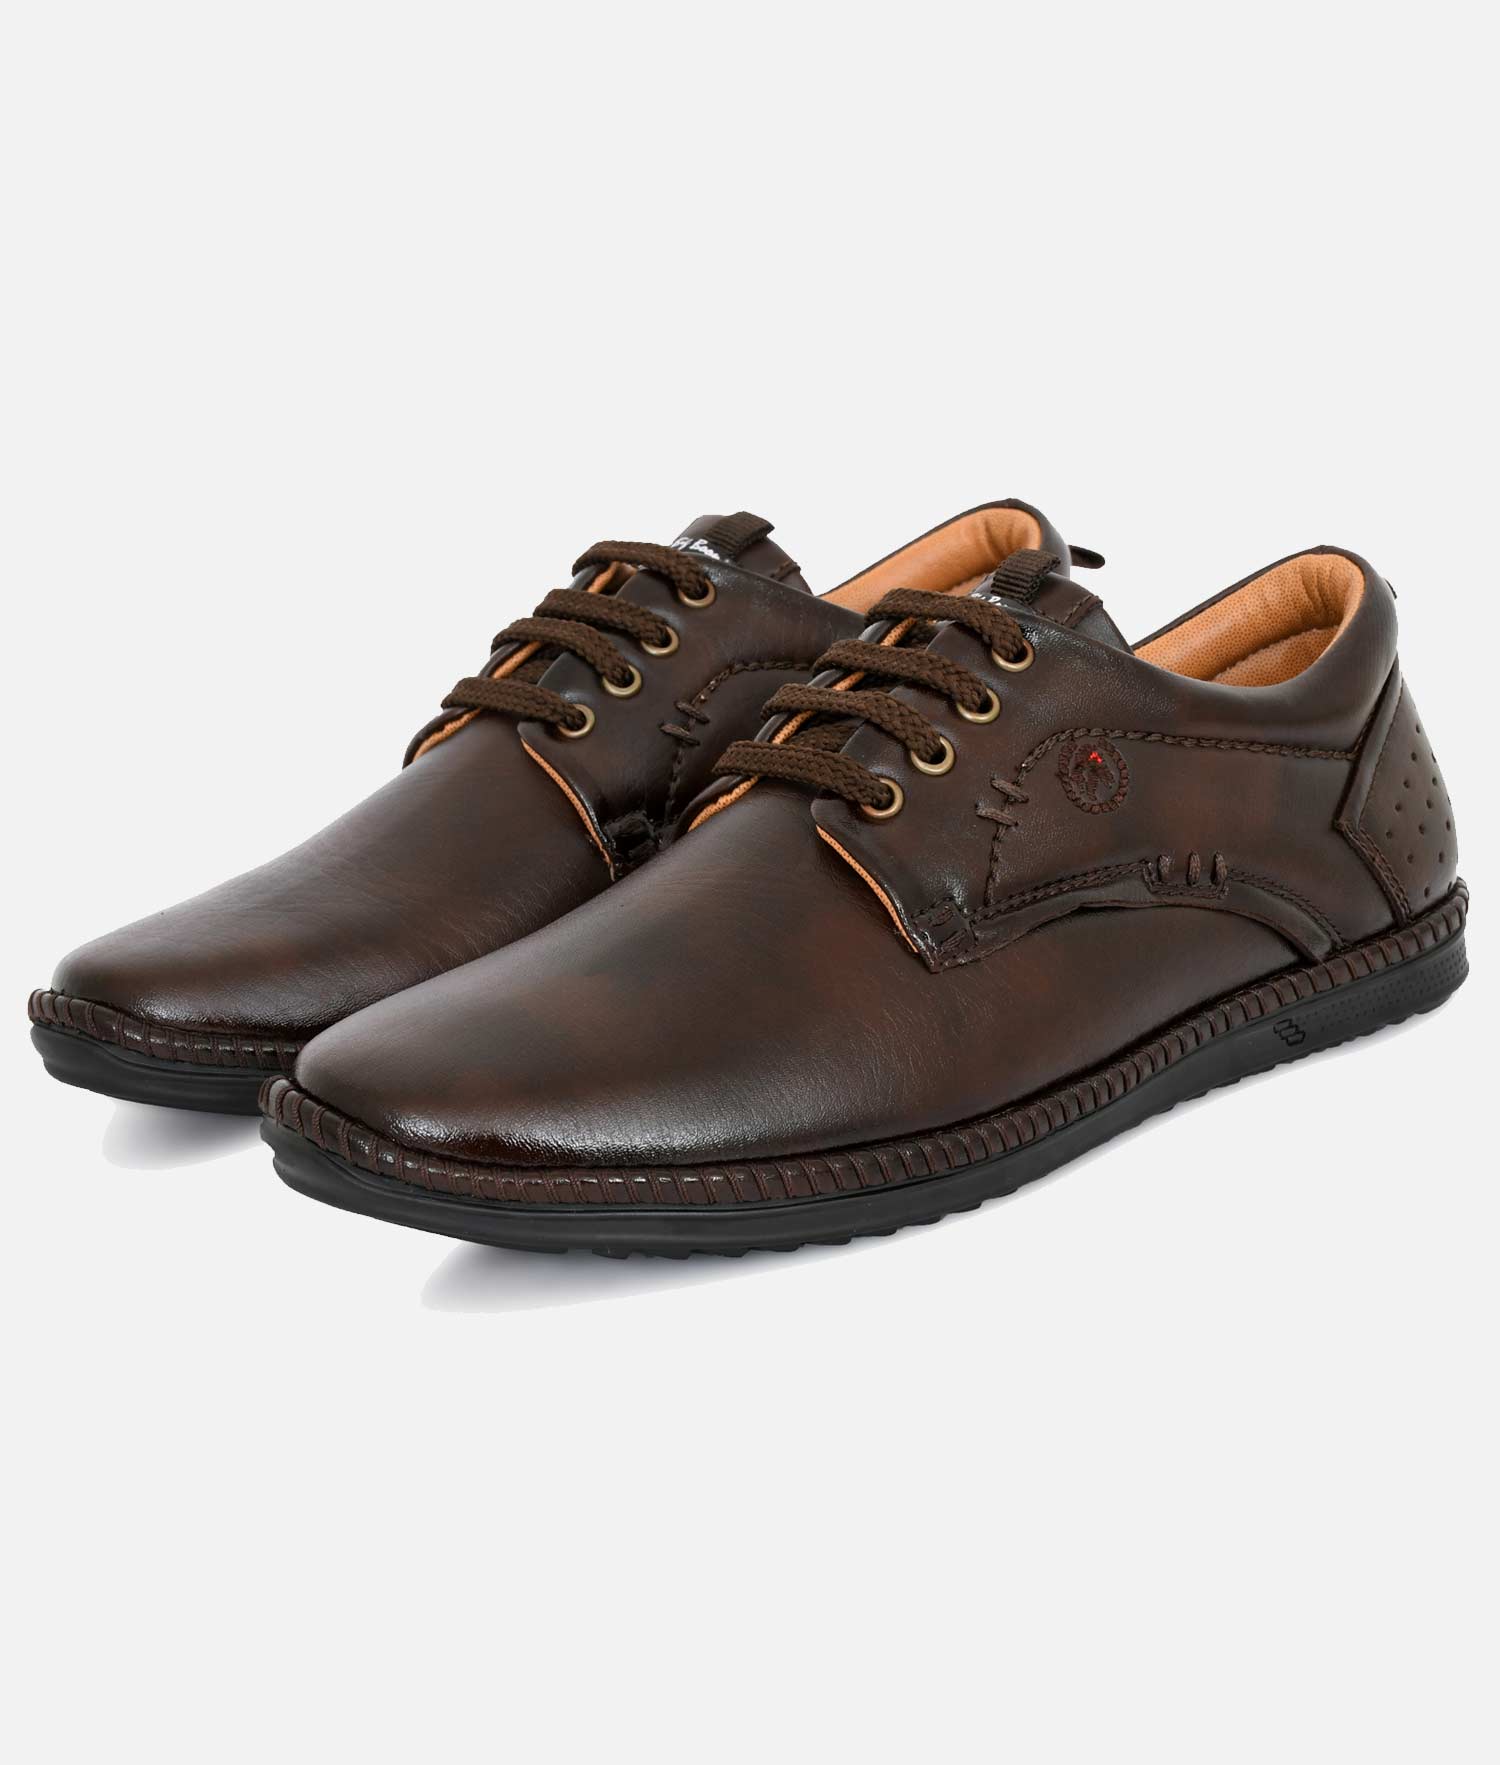 Leather Oxford Dress Shoe with Toe Cap Design by La Milano - Tuxedos Online